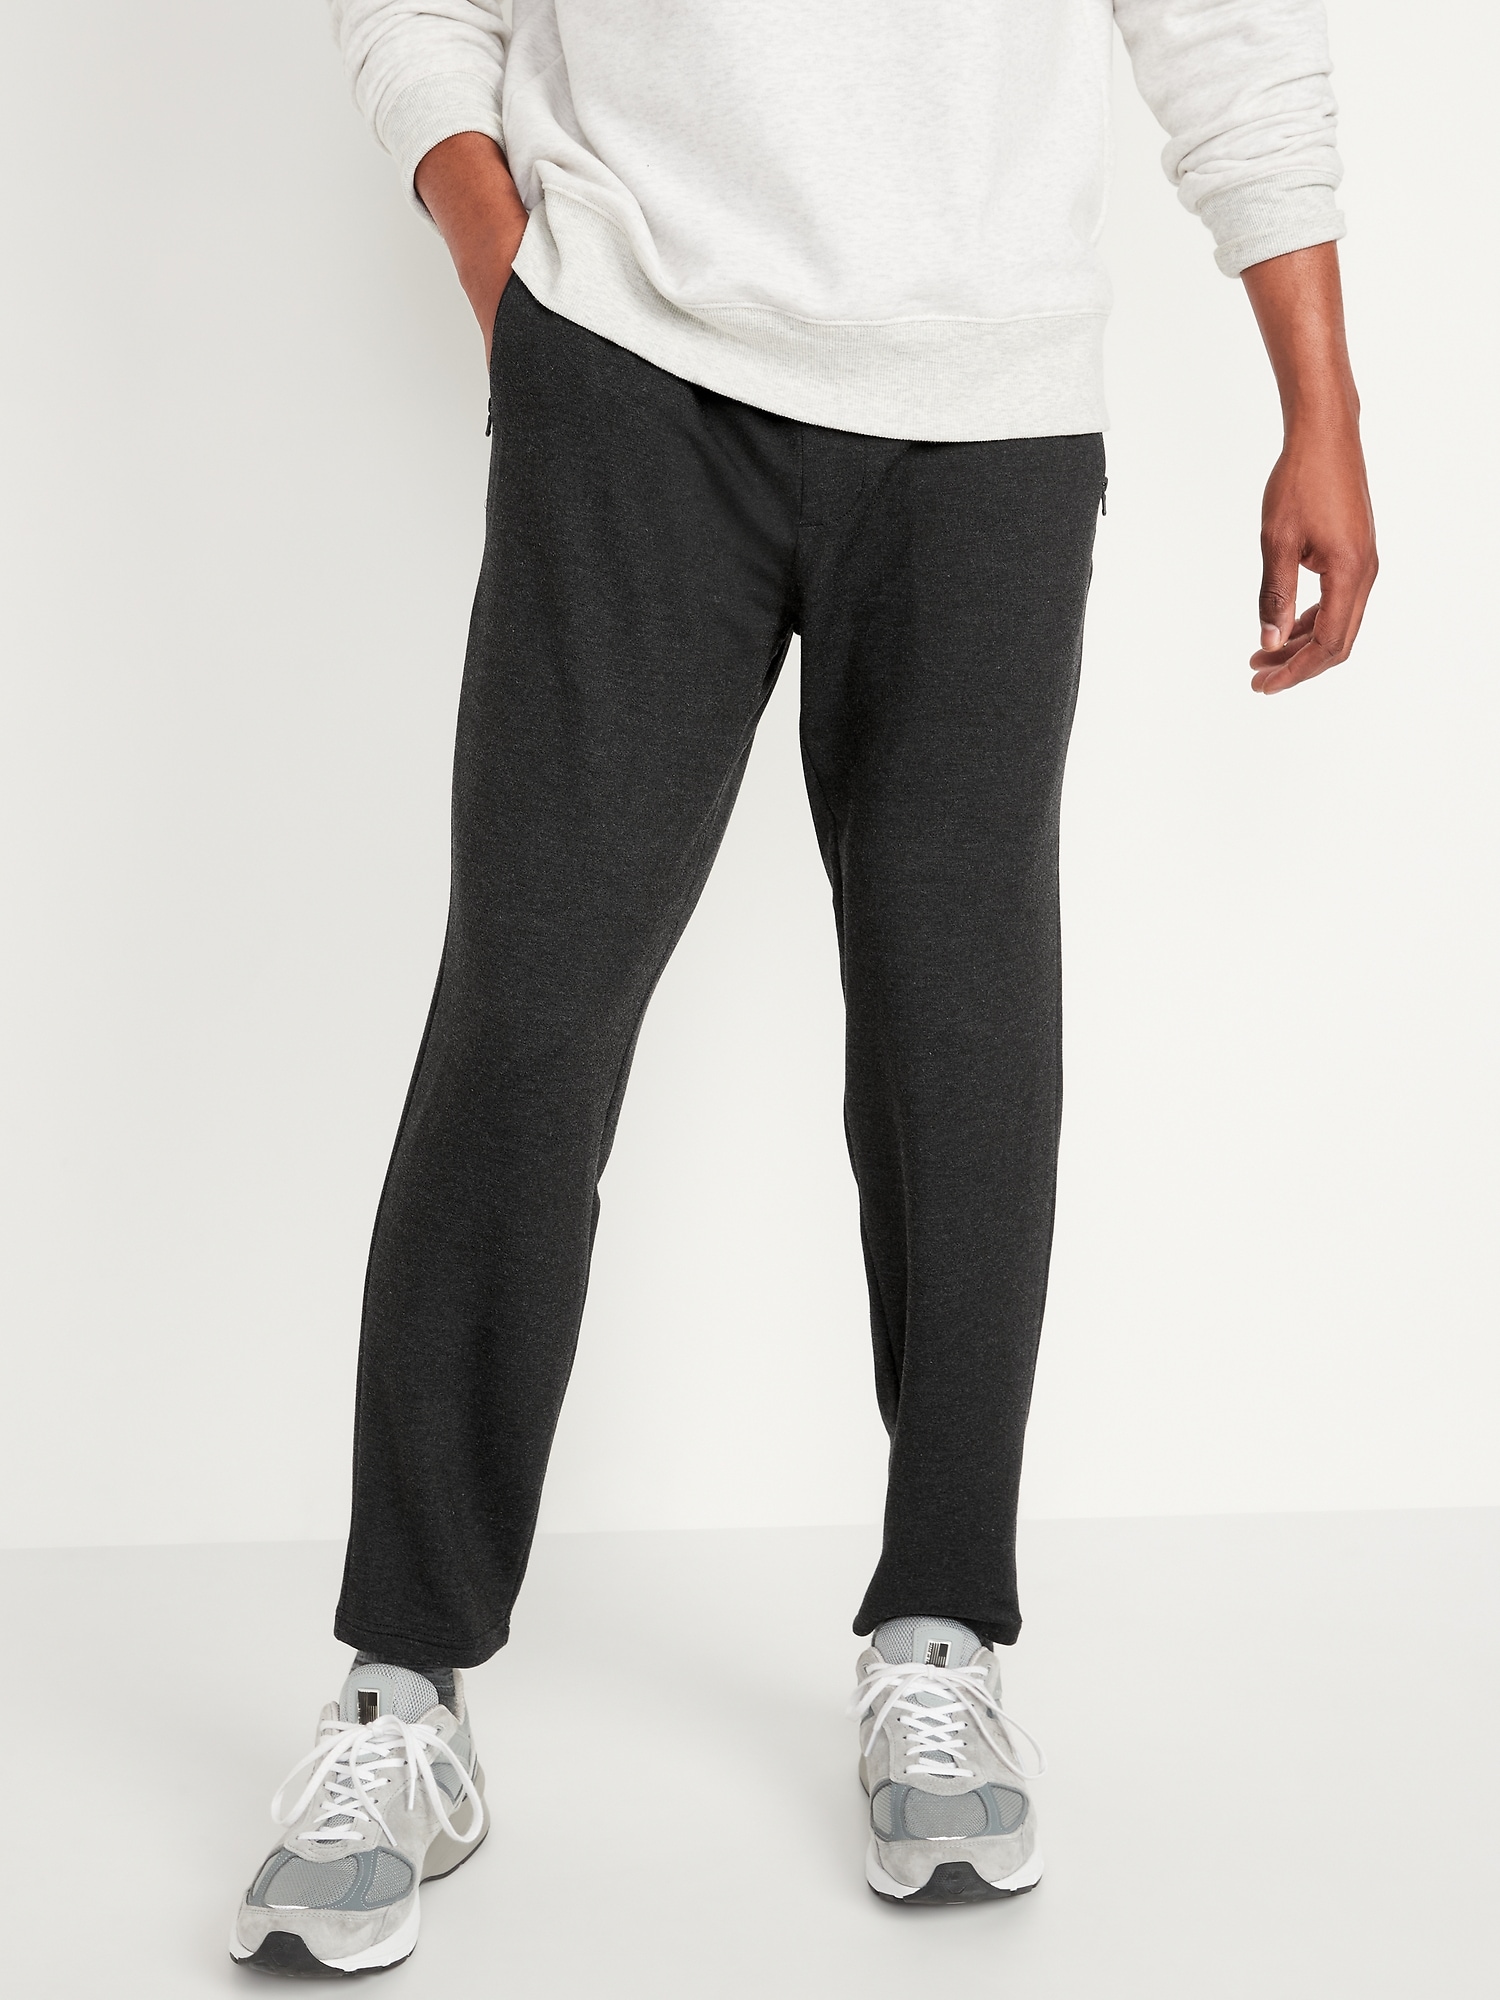 Old Navy Live-In Tapered French Terry Sweatpants for Men